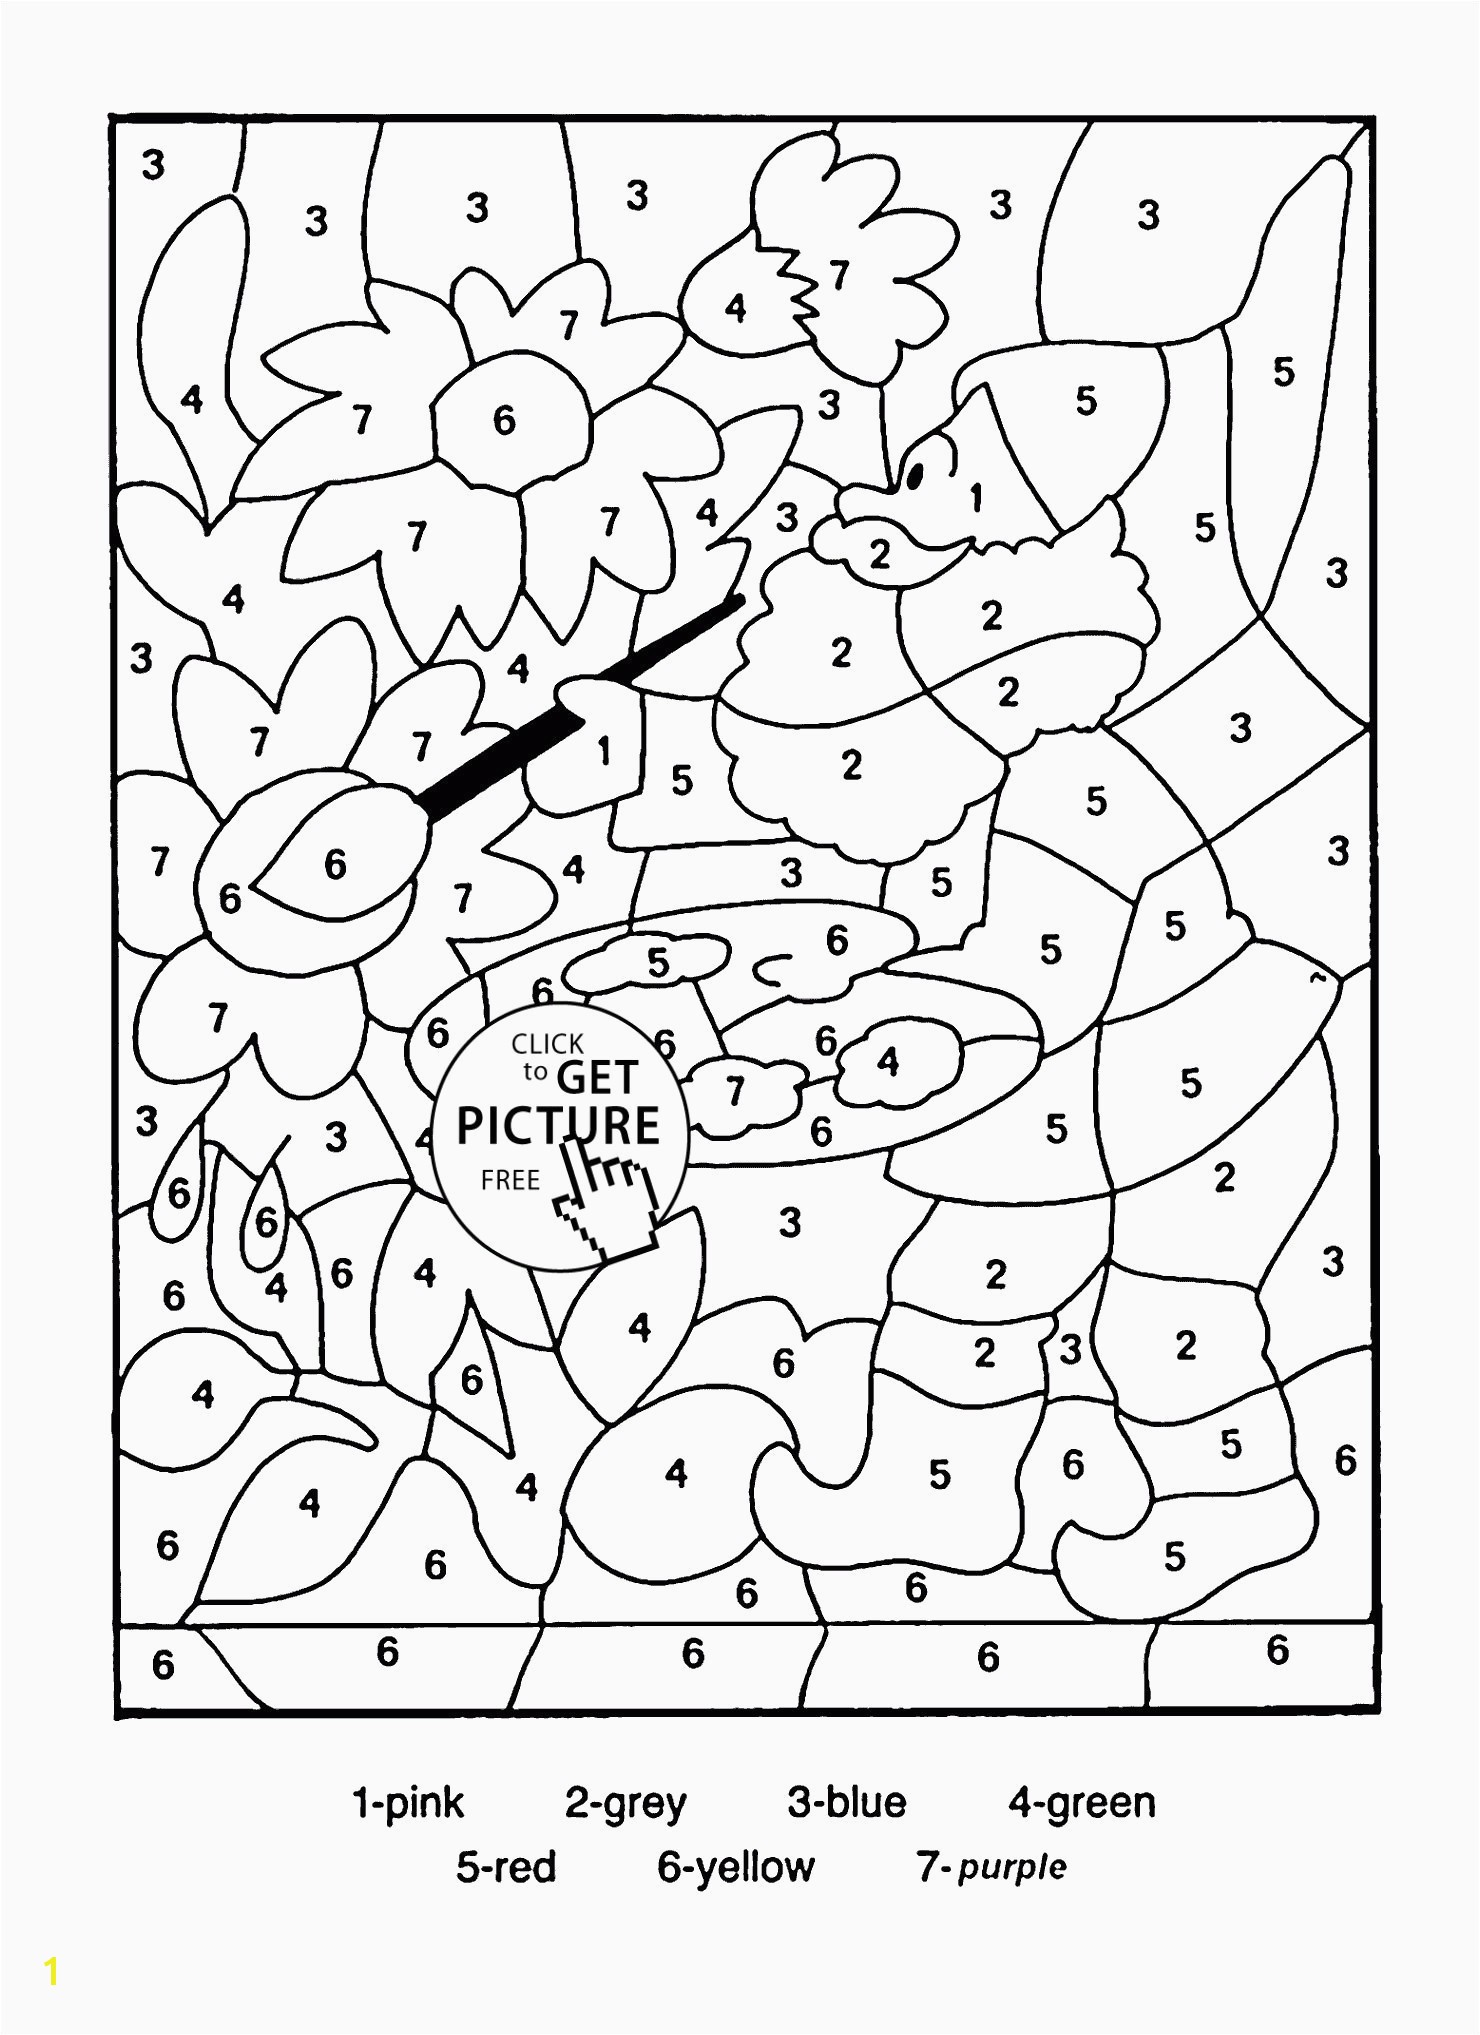 Sycamore Tree Coloring Page Sycamore Tree Coloring Page Awesome Number 2 Coloring Page Beautiful